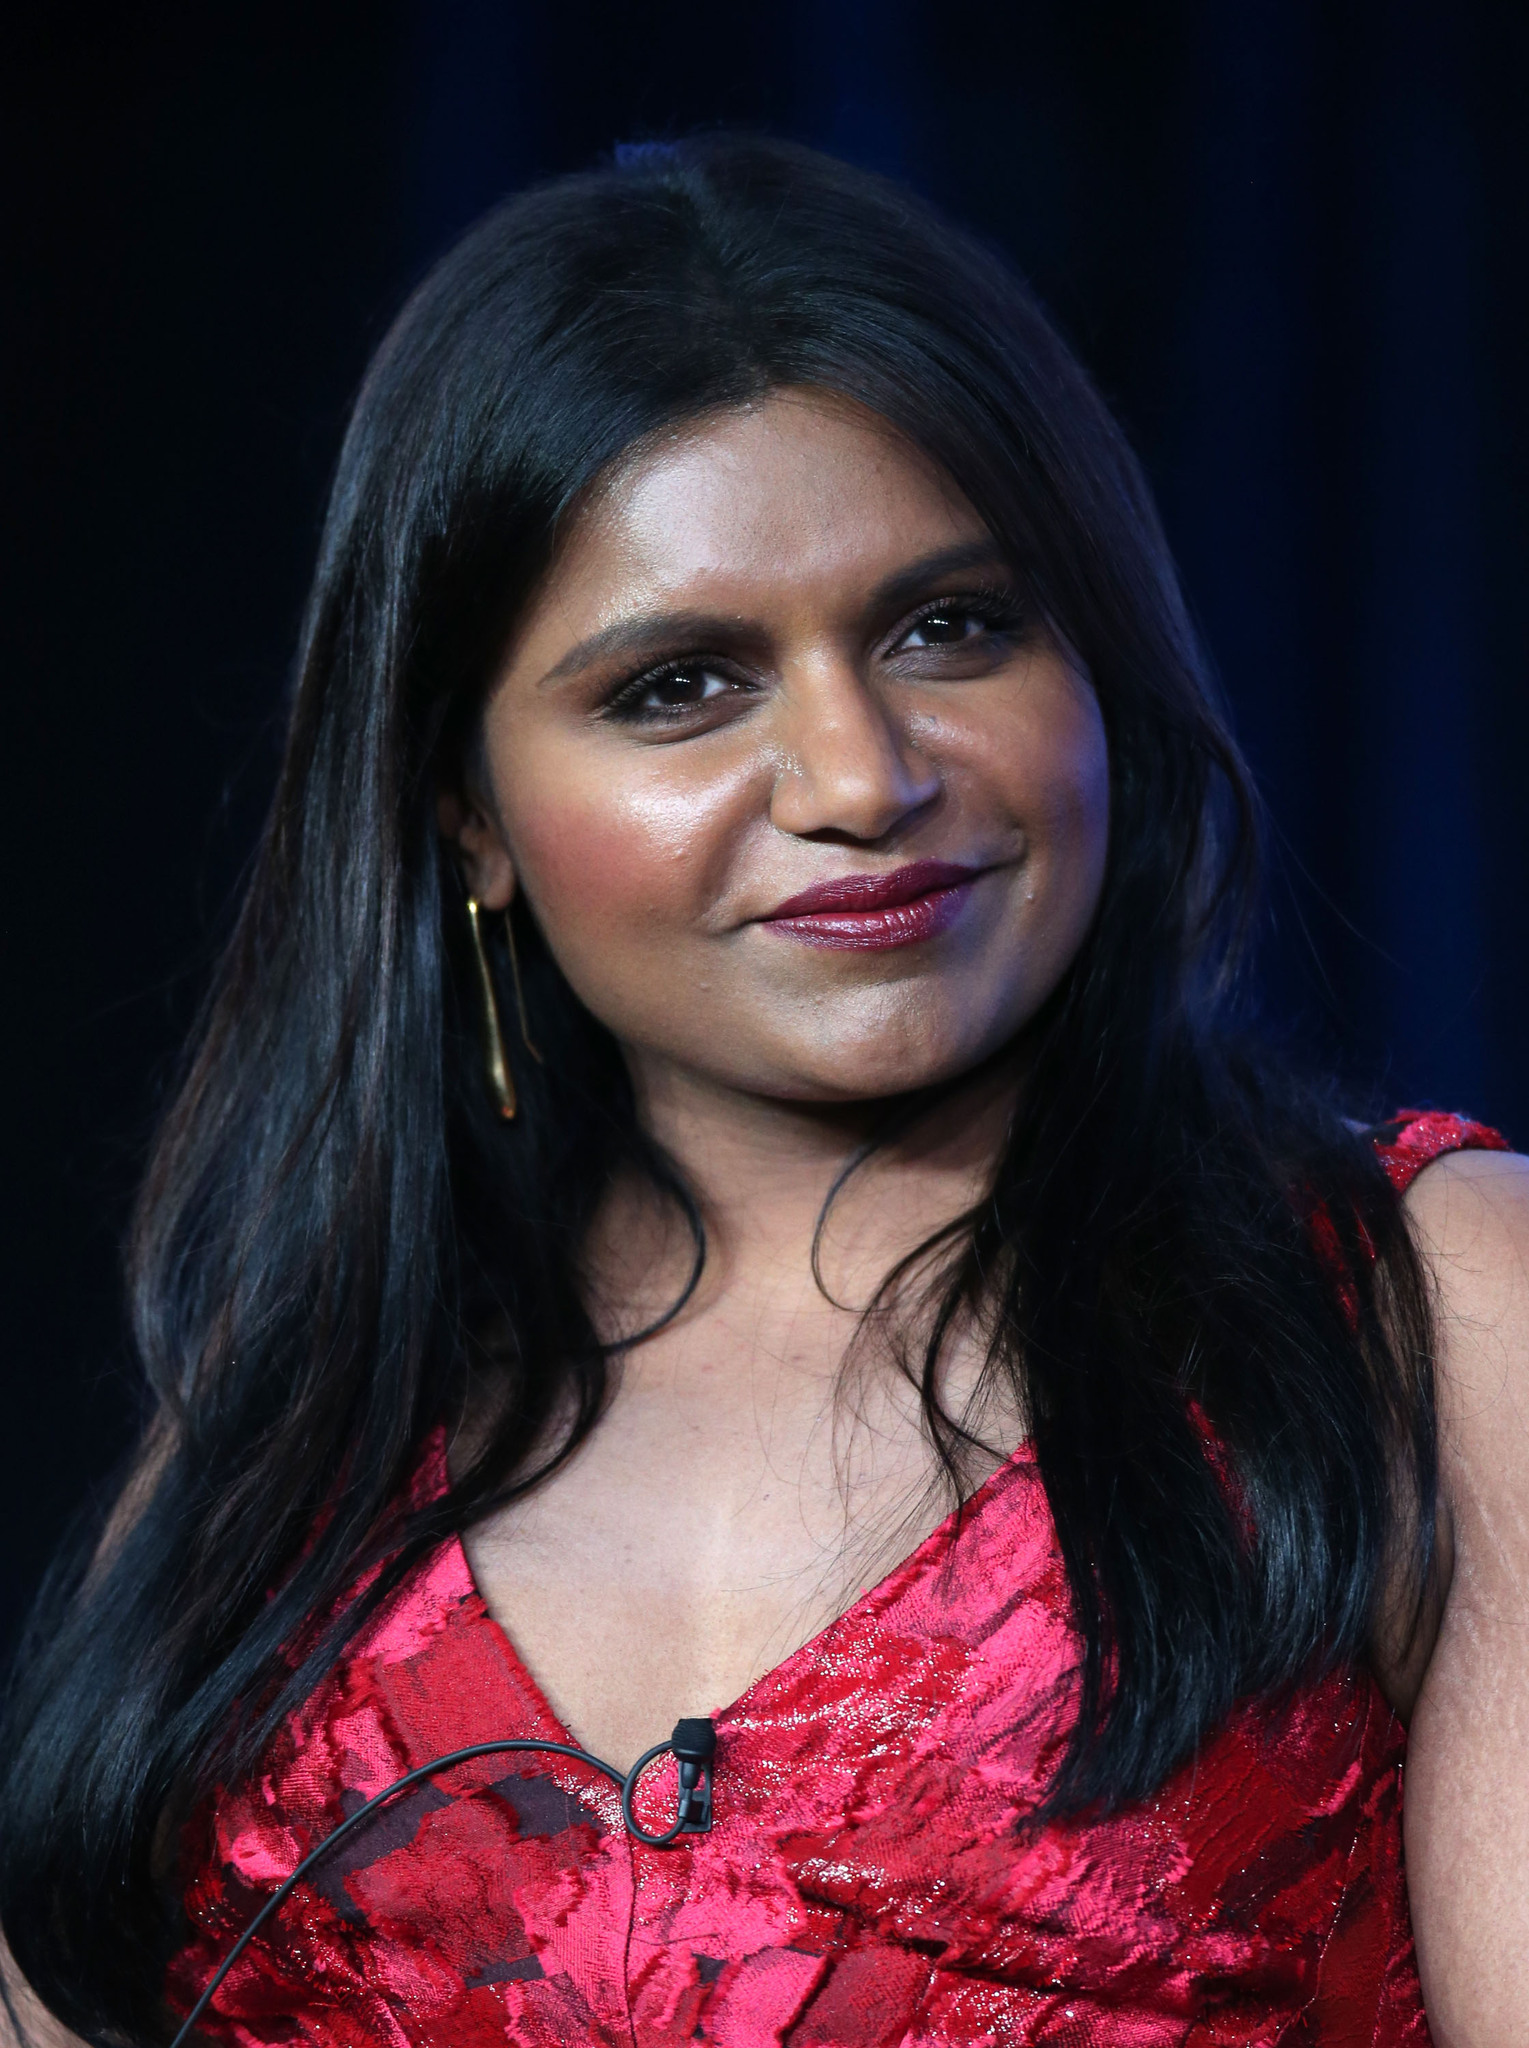 Mindy Kaling at event of The Mindy Project (2012)